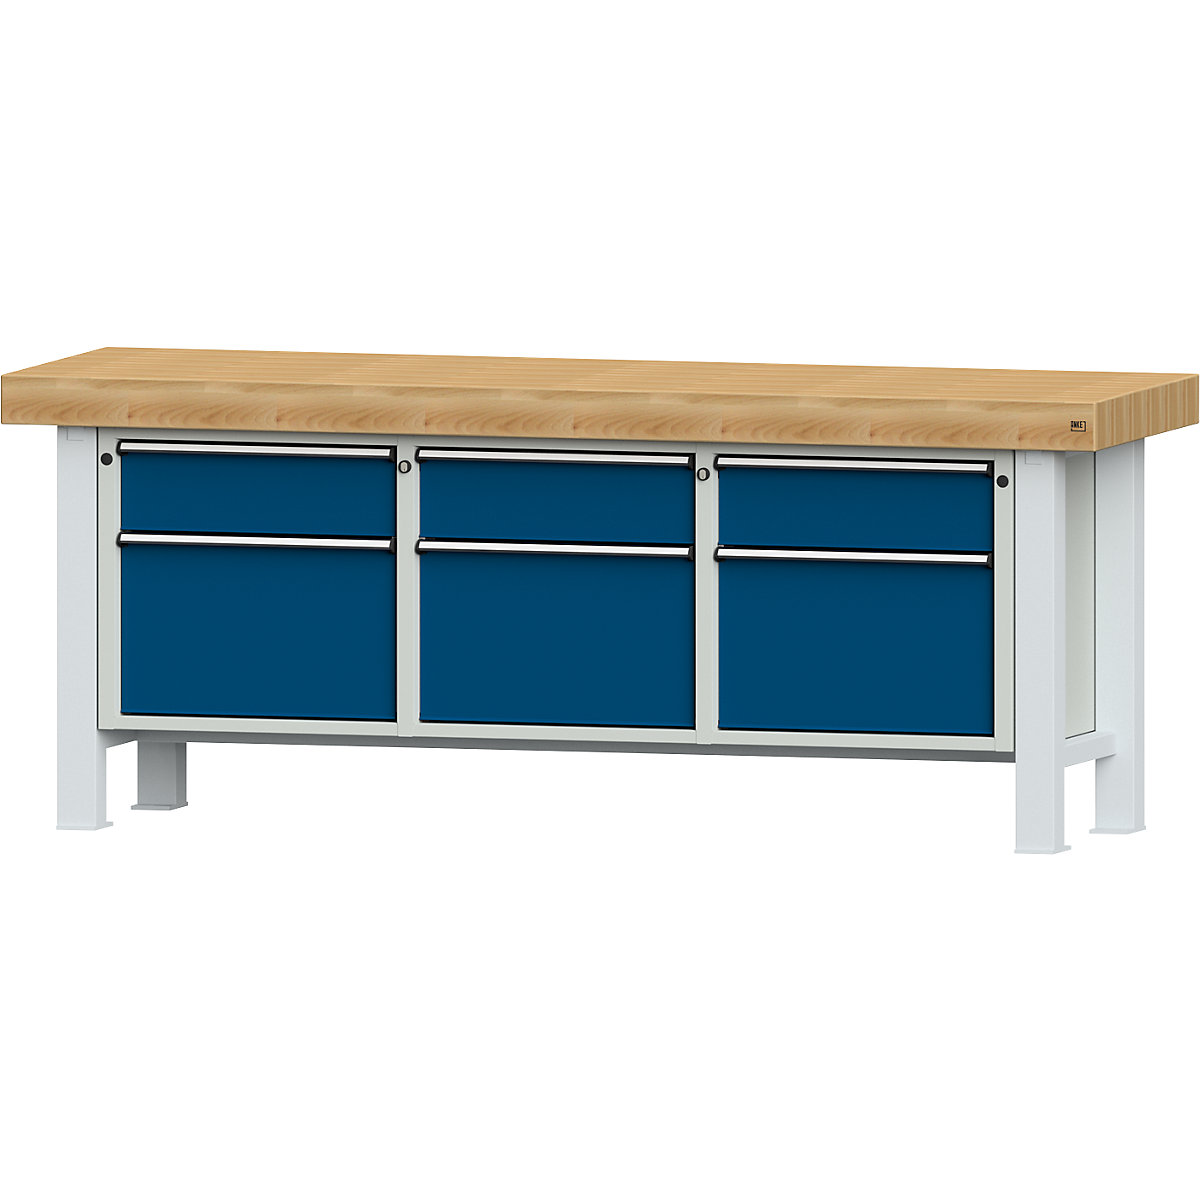 Heavy duty workbench – ANKE, worktop width 2250 mm, with 3 drawers and 3 hinged doors, worktop thickness 100 mm-1